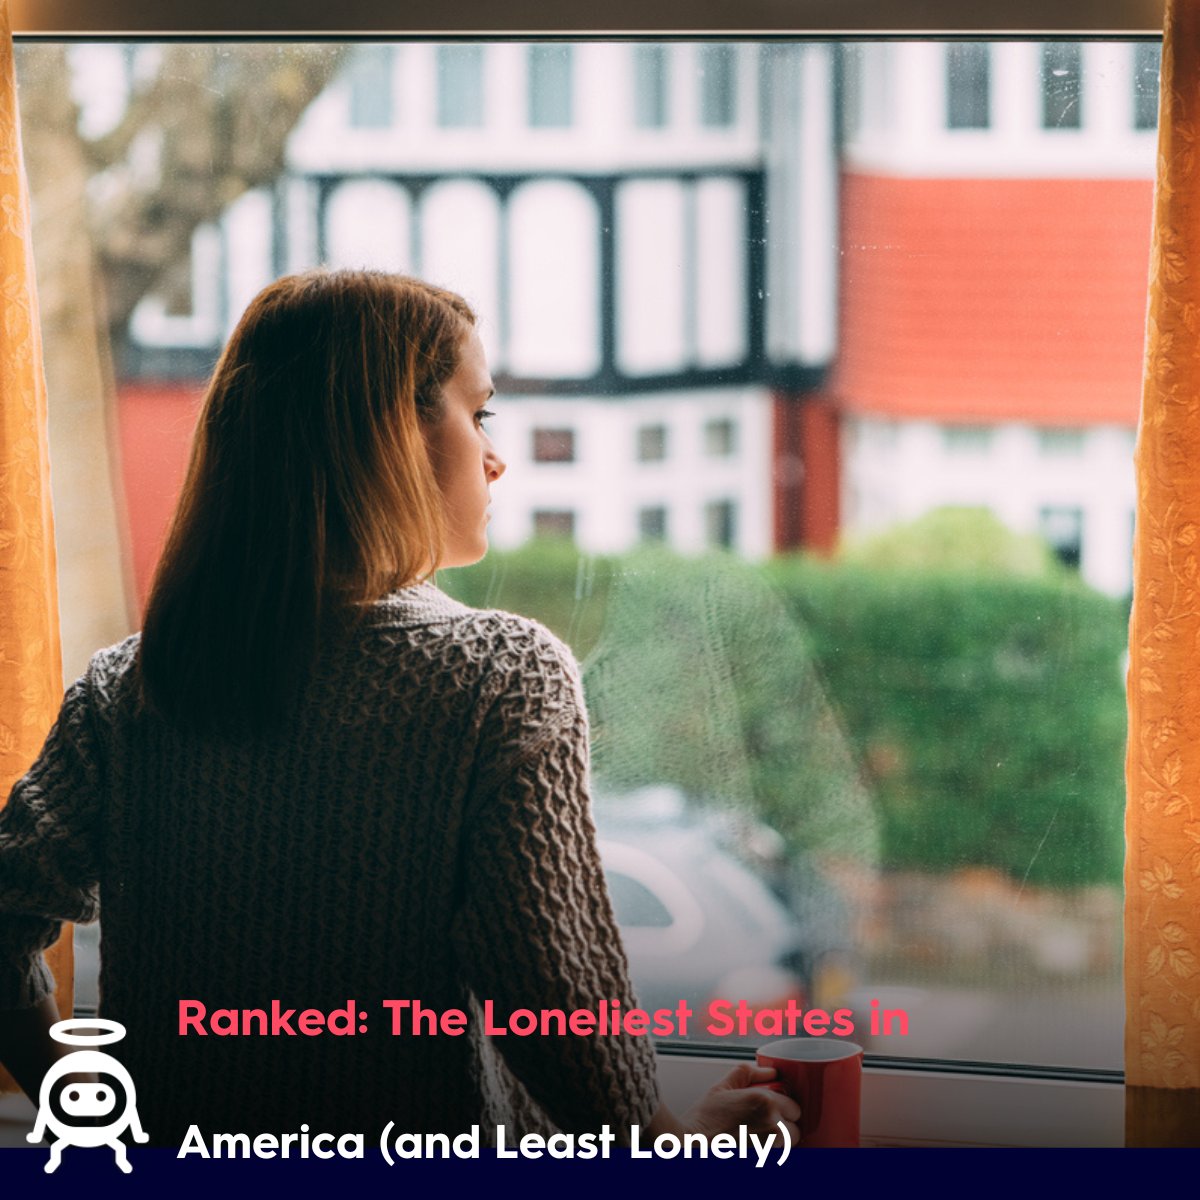 Did you know 😳😮? THESE are the loneliest states in America: bit.ly/3w1tJkL #thursdaymorning #MentalHealthMatters #therapy #onlinetherapy #loneliness